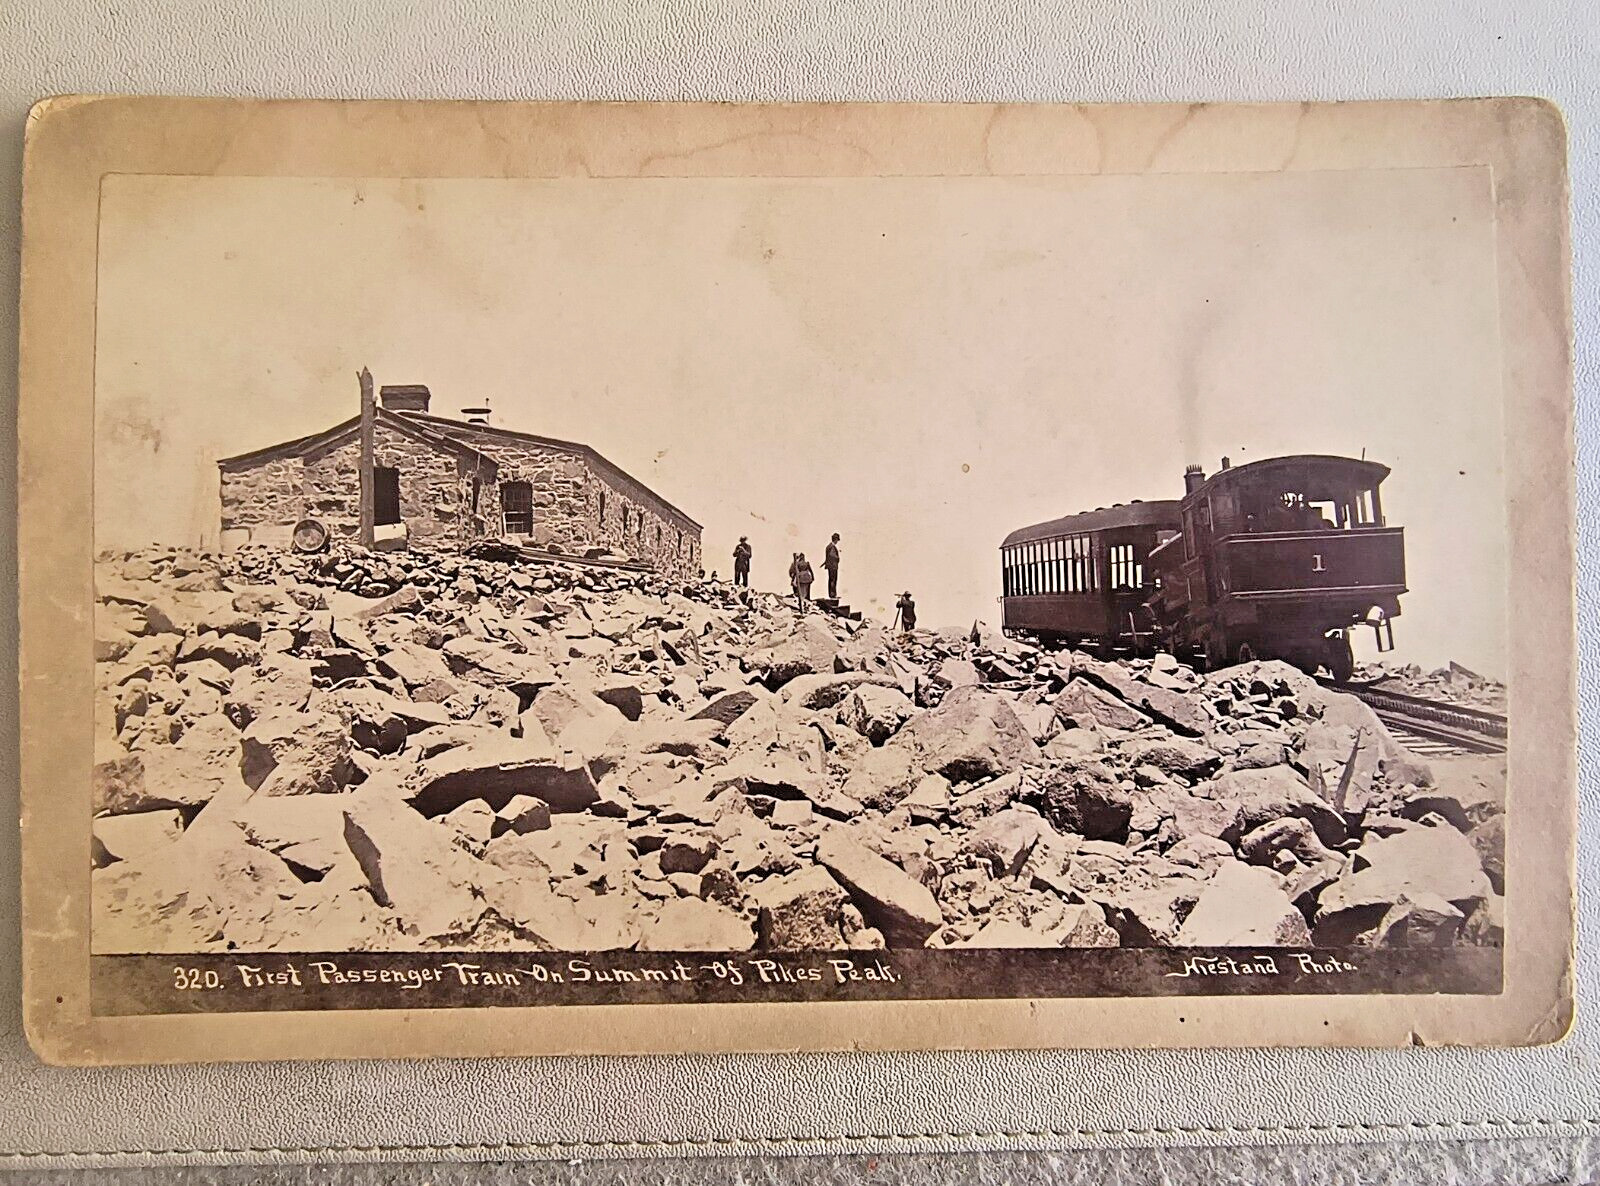 Cabinet Card Manitou & Pikes Peak Railway Cars w/passengers 1890s depot station